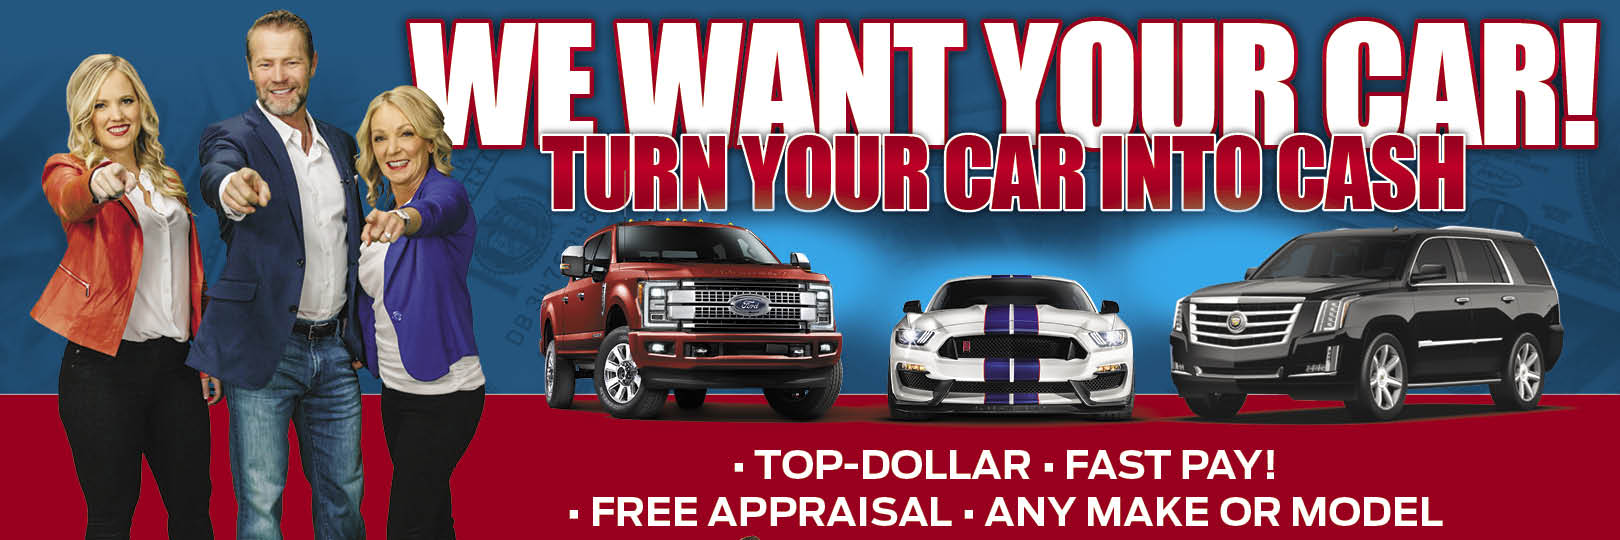 Trade or Sell Your Car Truck Or SUV